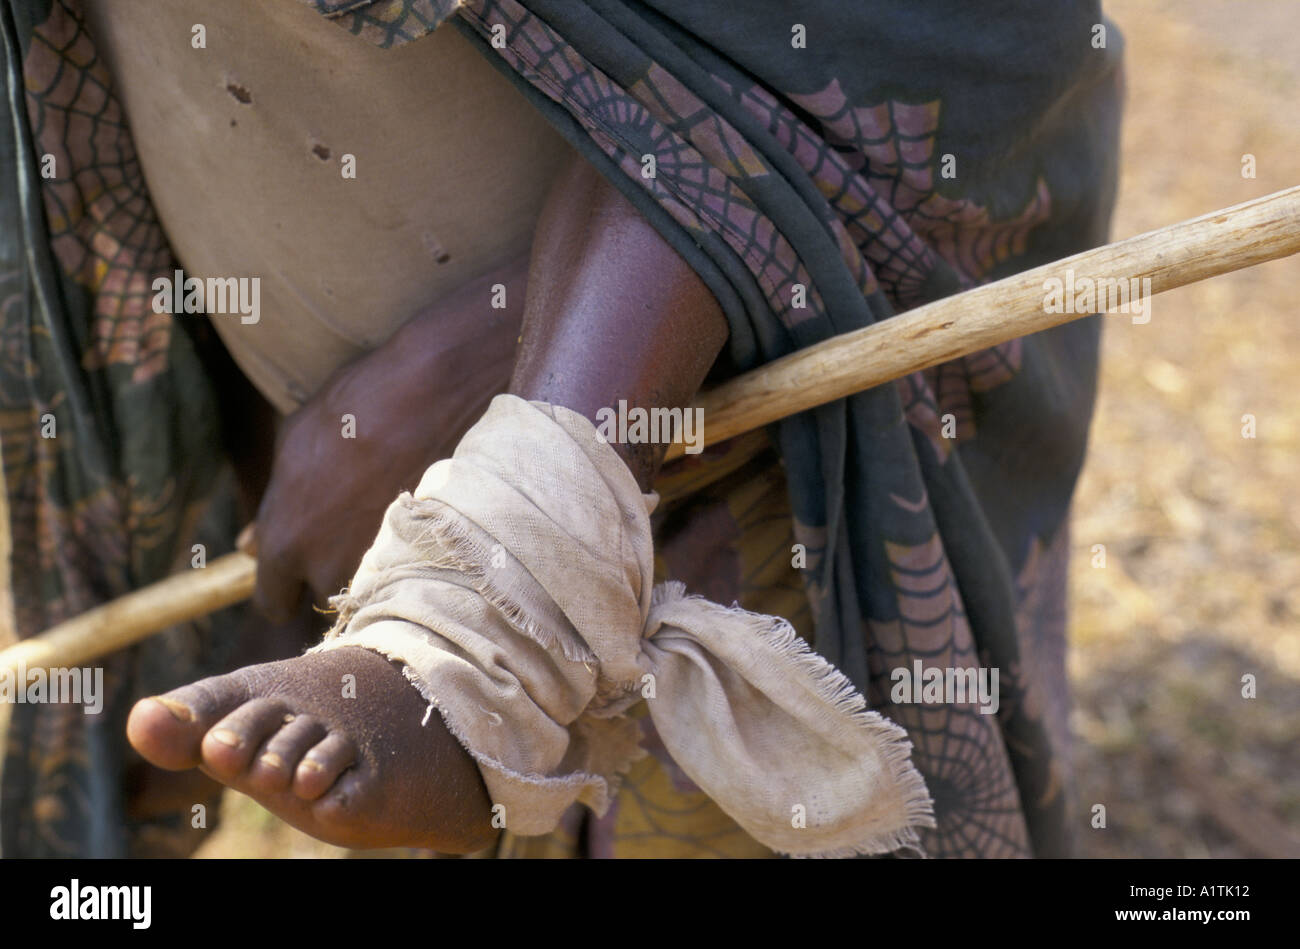 RWANDAN REFUGEE CHILD WITH SWOLLEN FEET CAUSED BY WALKING ON TARMAC ROADS BEING CARRIED BY PARENT ZAIRE AUG SEPT 1994 Stock Photo